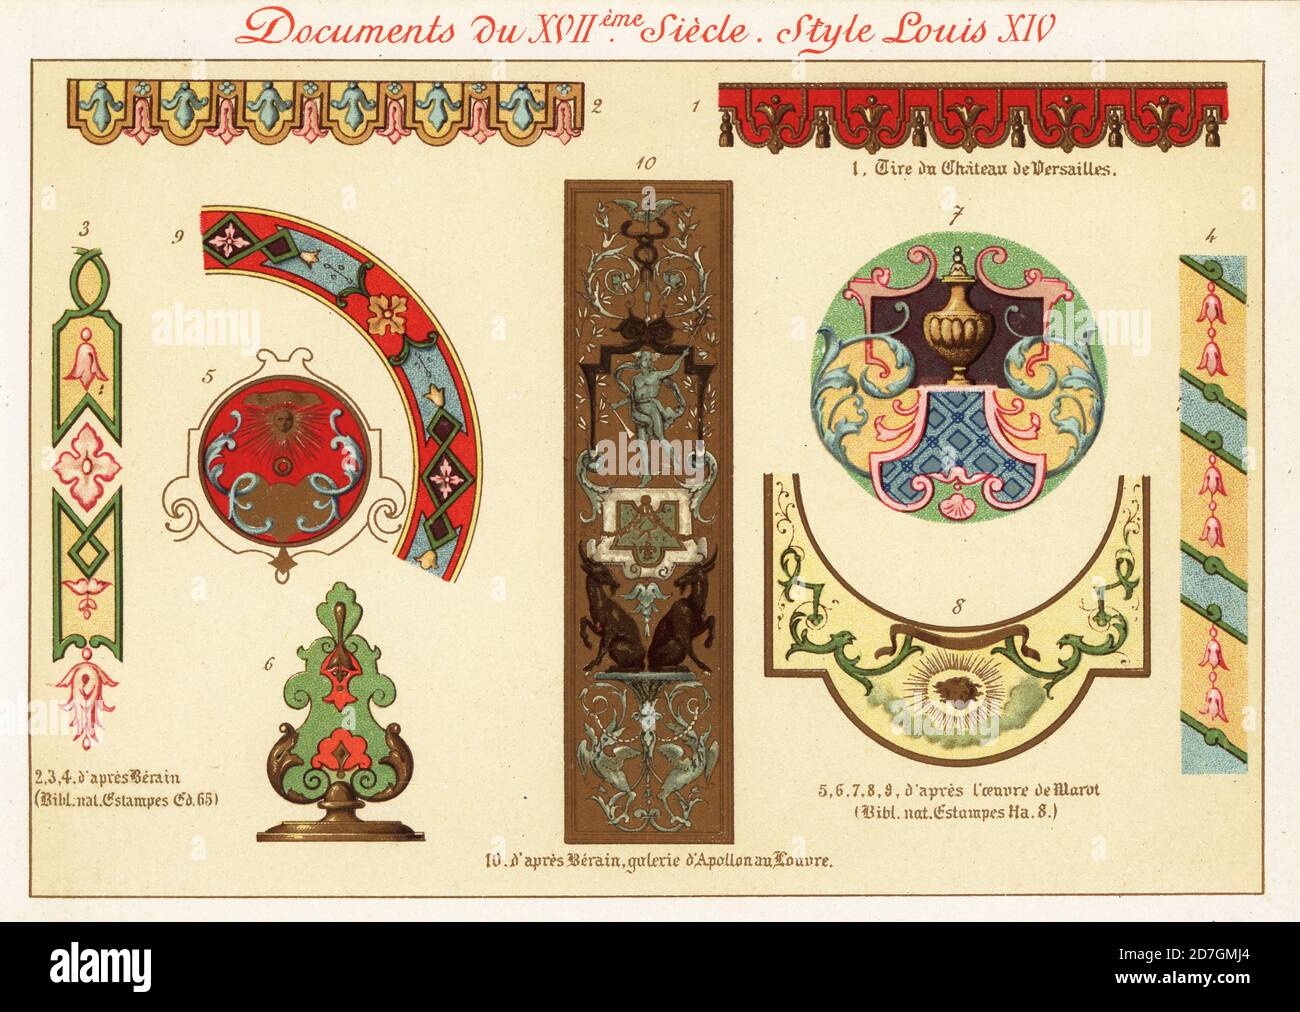 Design elements from the rococo era of King Louis XIV, the Sun King, 17th century. 1 from Versailles, 2-4, 10 after Jean Berain, 5-9 after works by Daniel Marot, Chromolithograph designed and lithographed by Ernst Guillot from Elements d'Ornementation du XVIIme et XVIIIe Siecle, Elements of Ornament of the 17th and 18th century, Renouard, Paris, 1890. Stock Photo